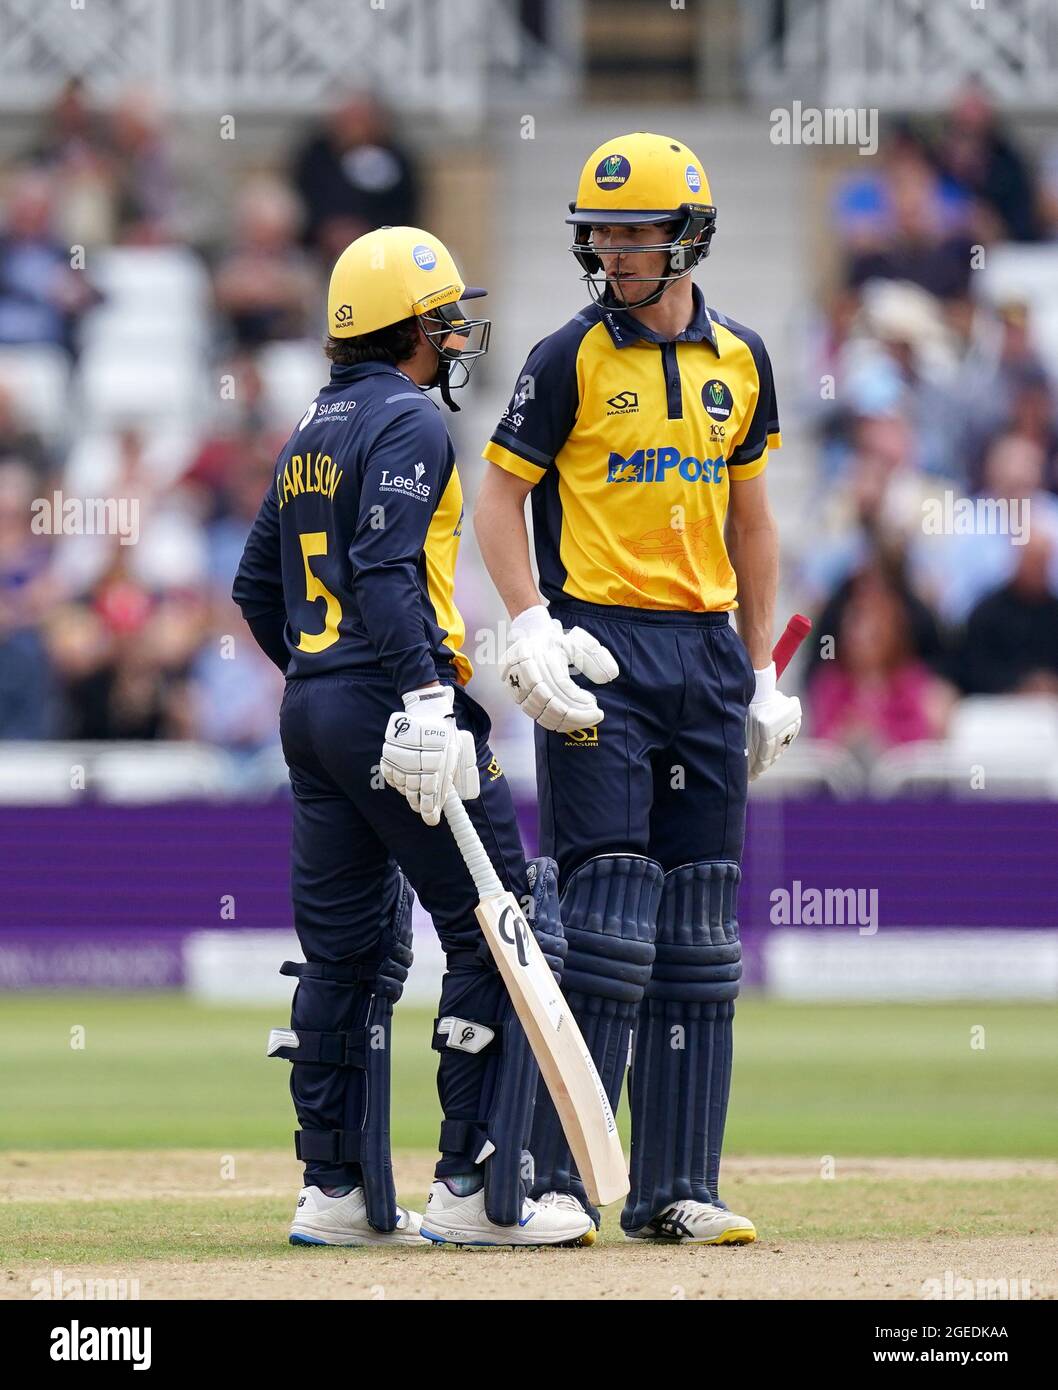 Glamorgan's Kiran Carlson (left) and Nick Selman during the Royal London One-Day Cup Final at Trent Bridge, Nottingham. Picture date: Thursday August 19, 2021. See PA story CRICKET Final. Photo credit should read: Zac Goodwin/PA Wire. RESTRICTIONS: No commercial use without prior written consent of the ECB. Still image use only. No moving images to emulate broadcast. Editorial use only. No removing or obscuring of sponsor logos. Stock Photo